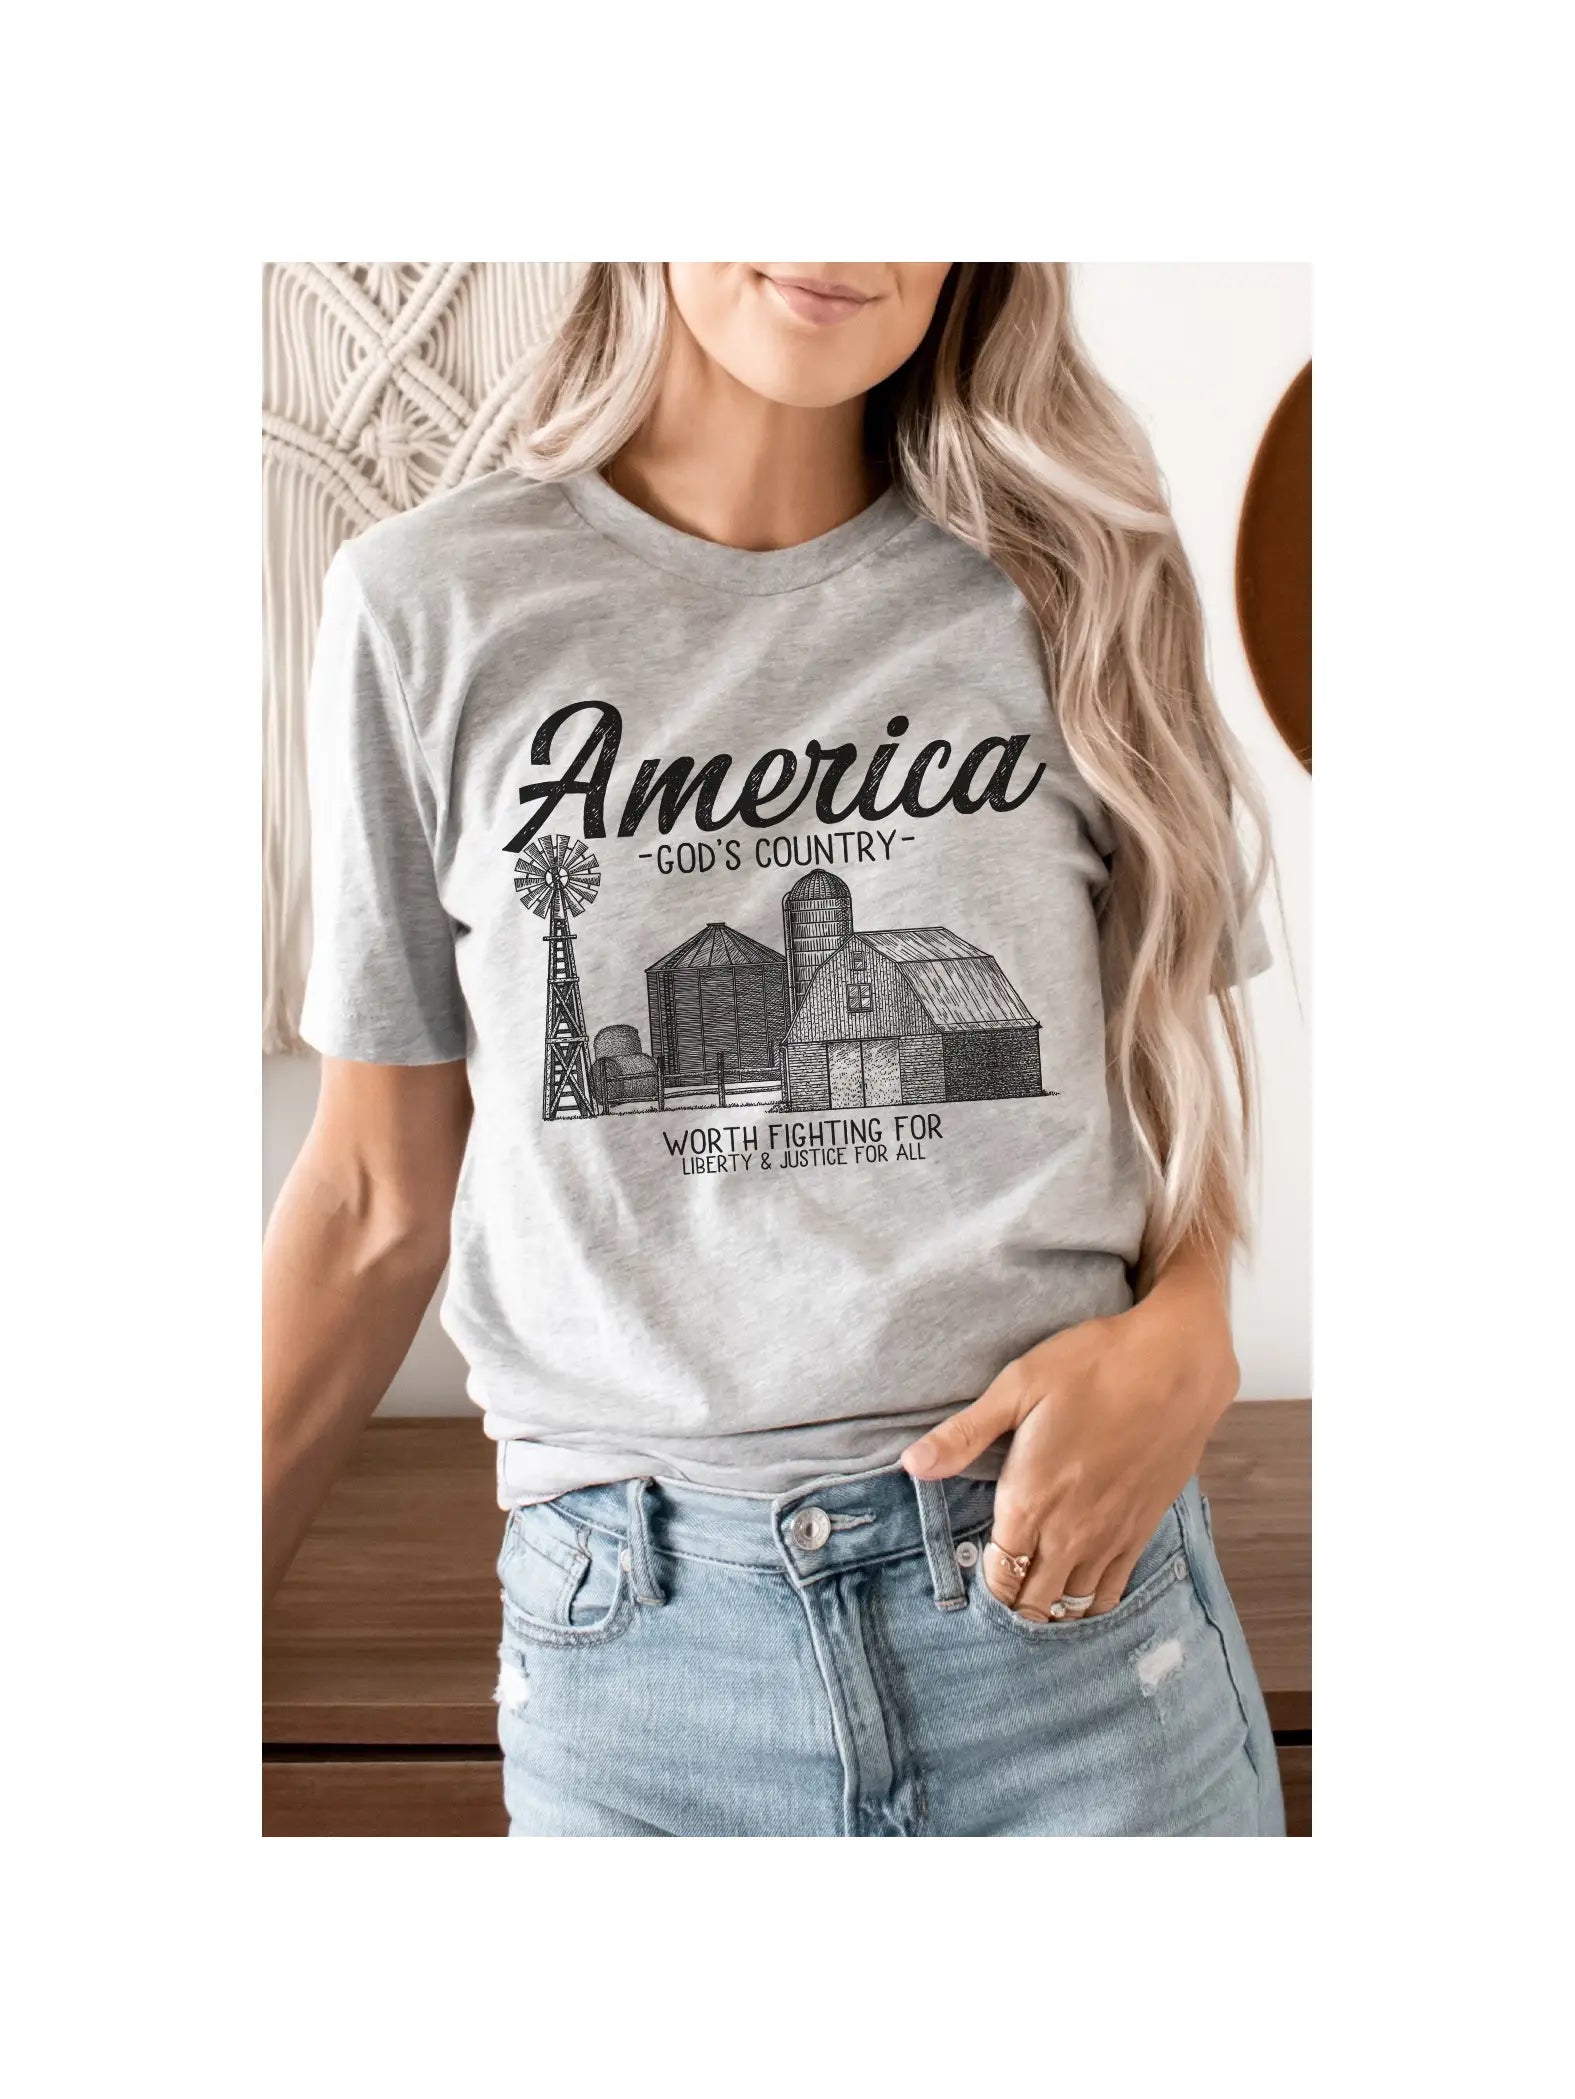 America God’s Country Graphic Tee